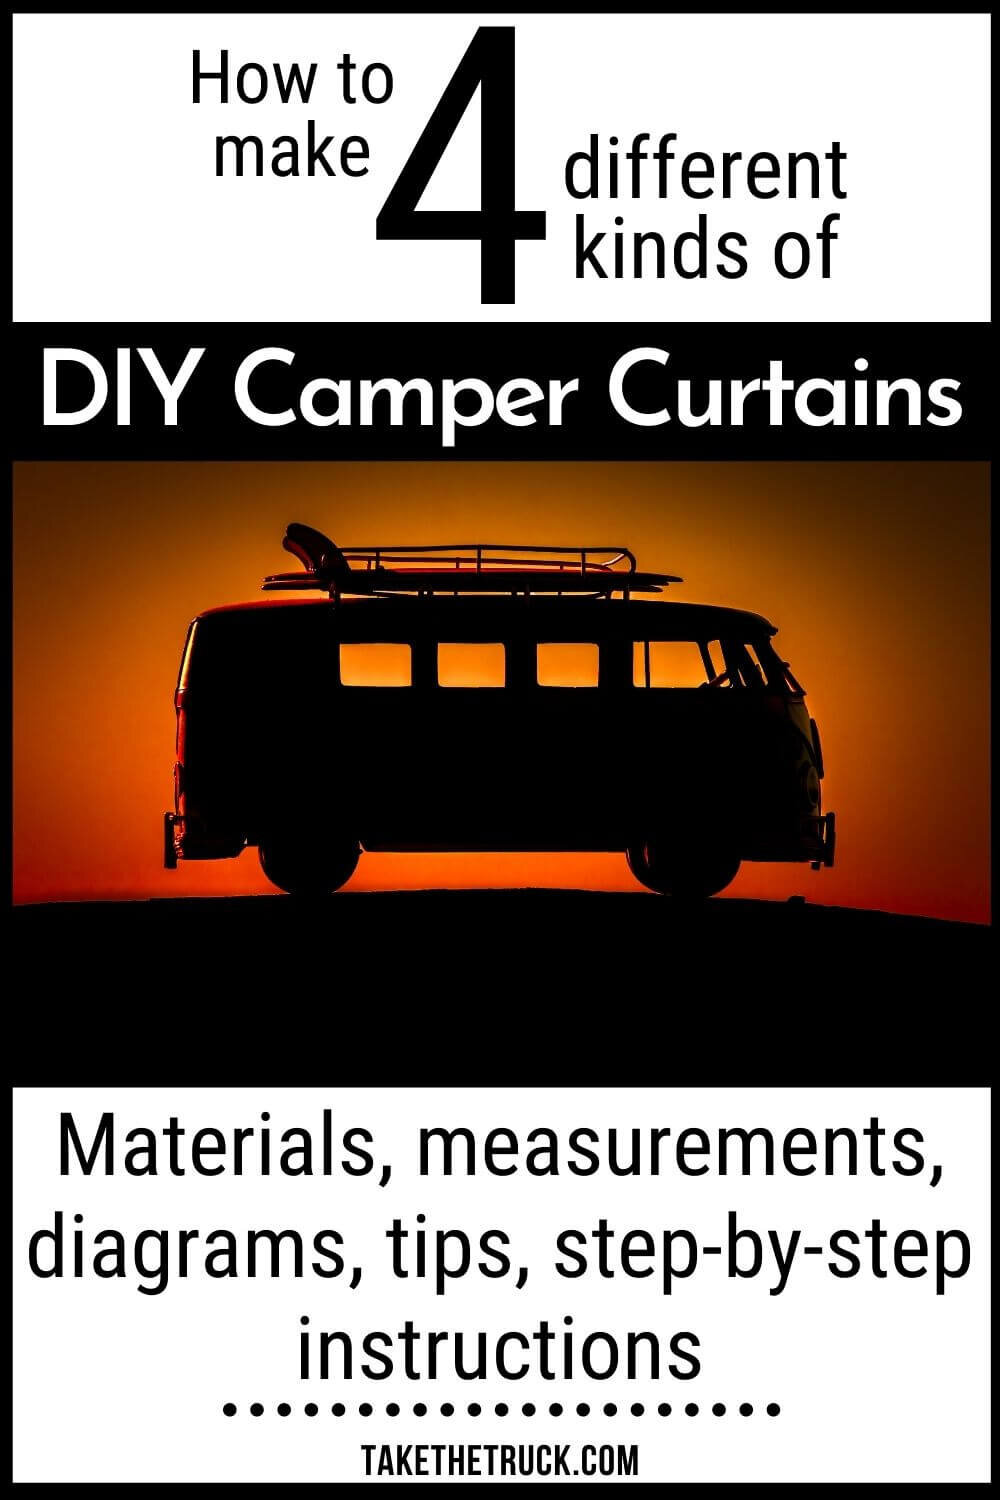 Tips, Guides, Materials to make 4 different kinds of DIY camper curtains for updating a camper or building a diy camper.